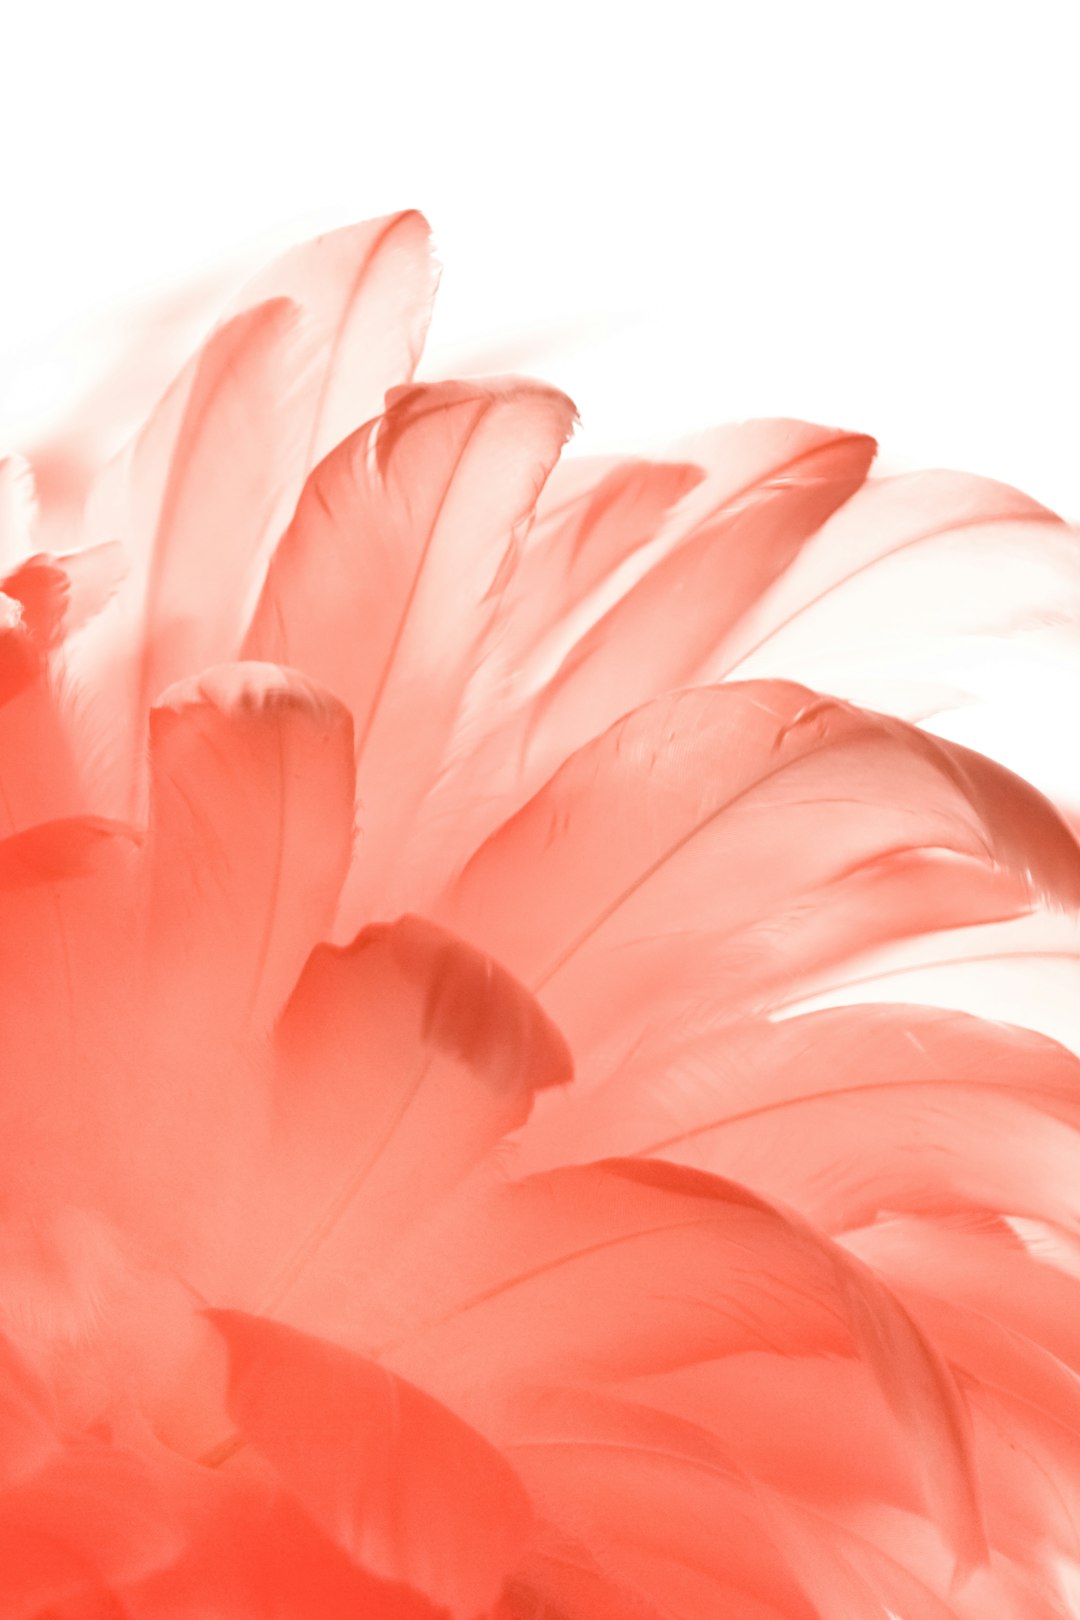  pink flower in close up photography flamingo